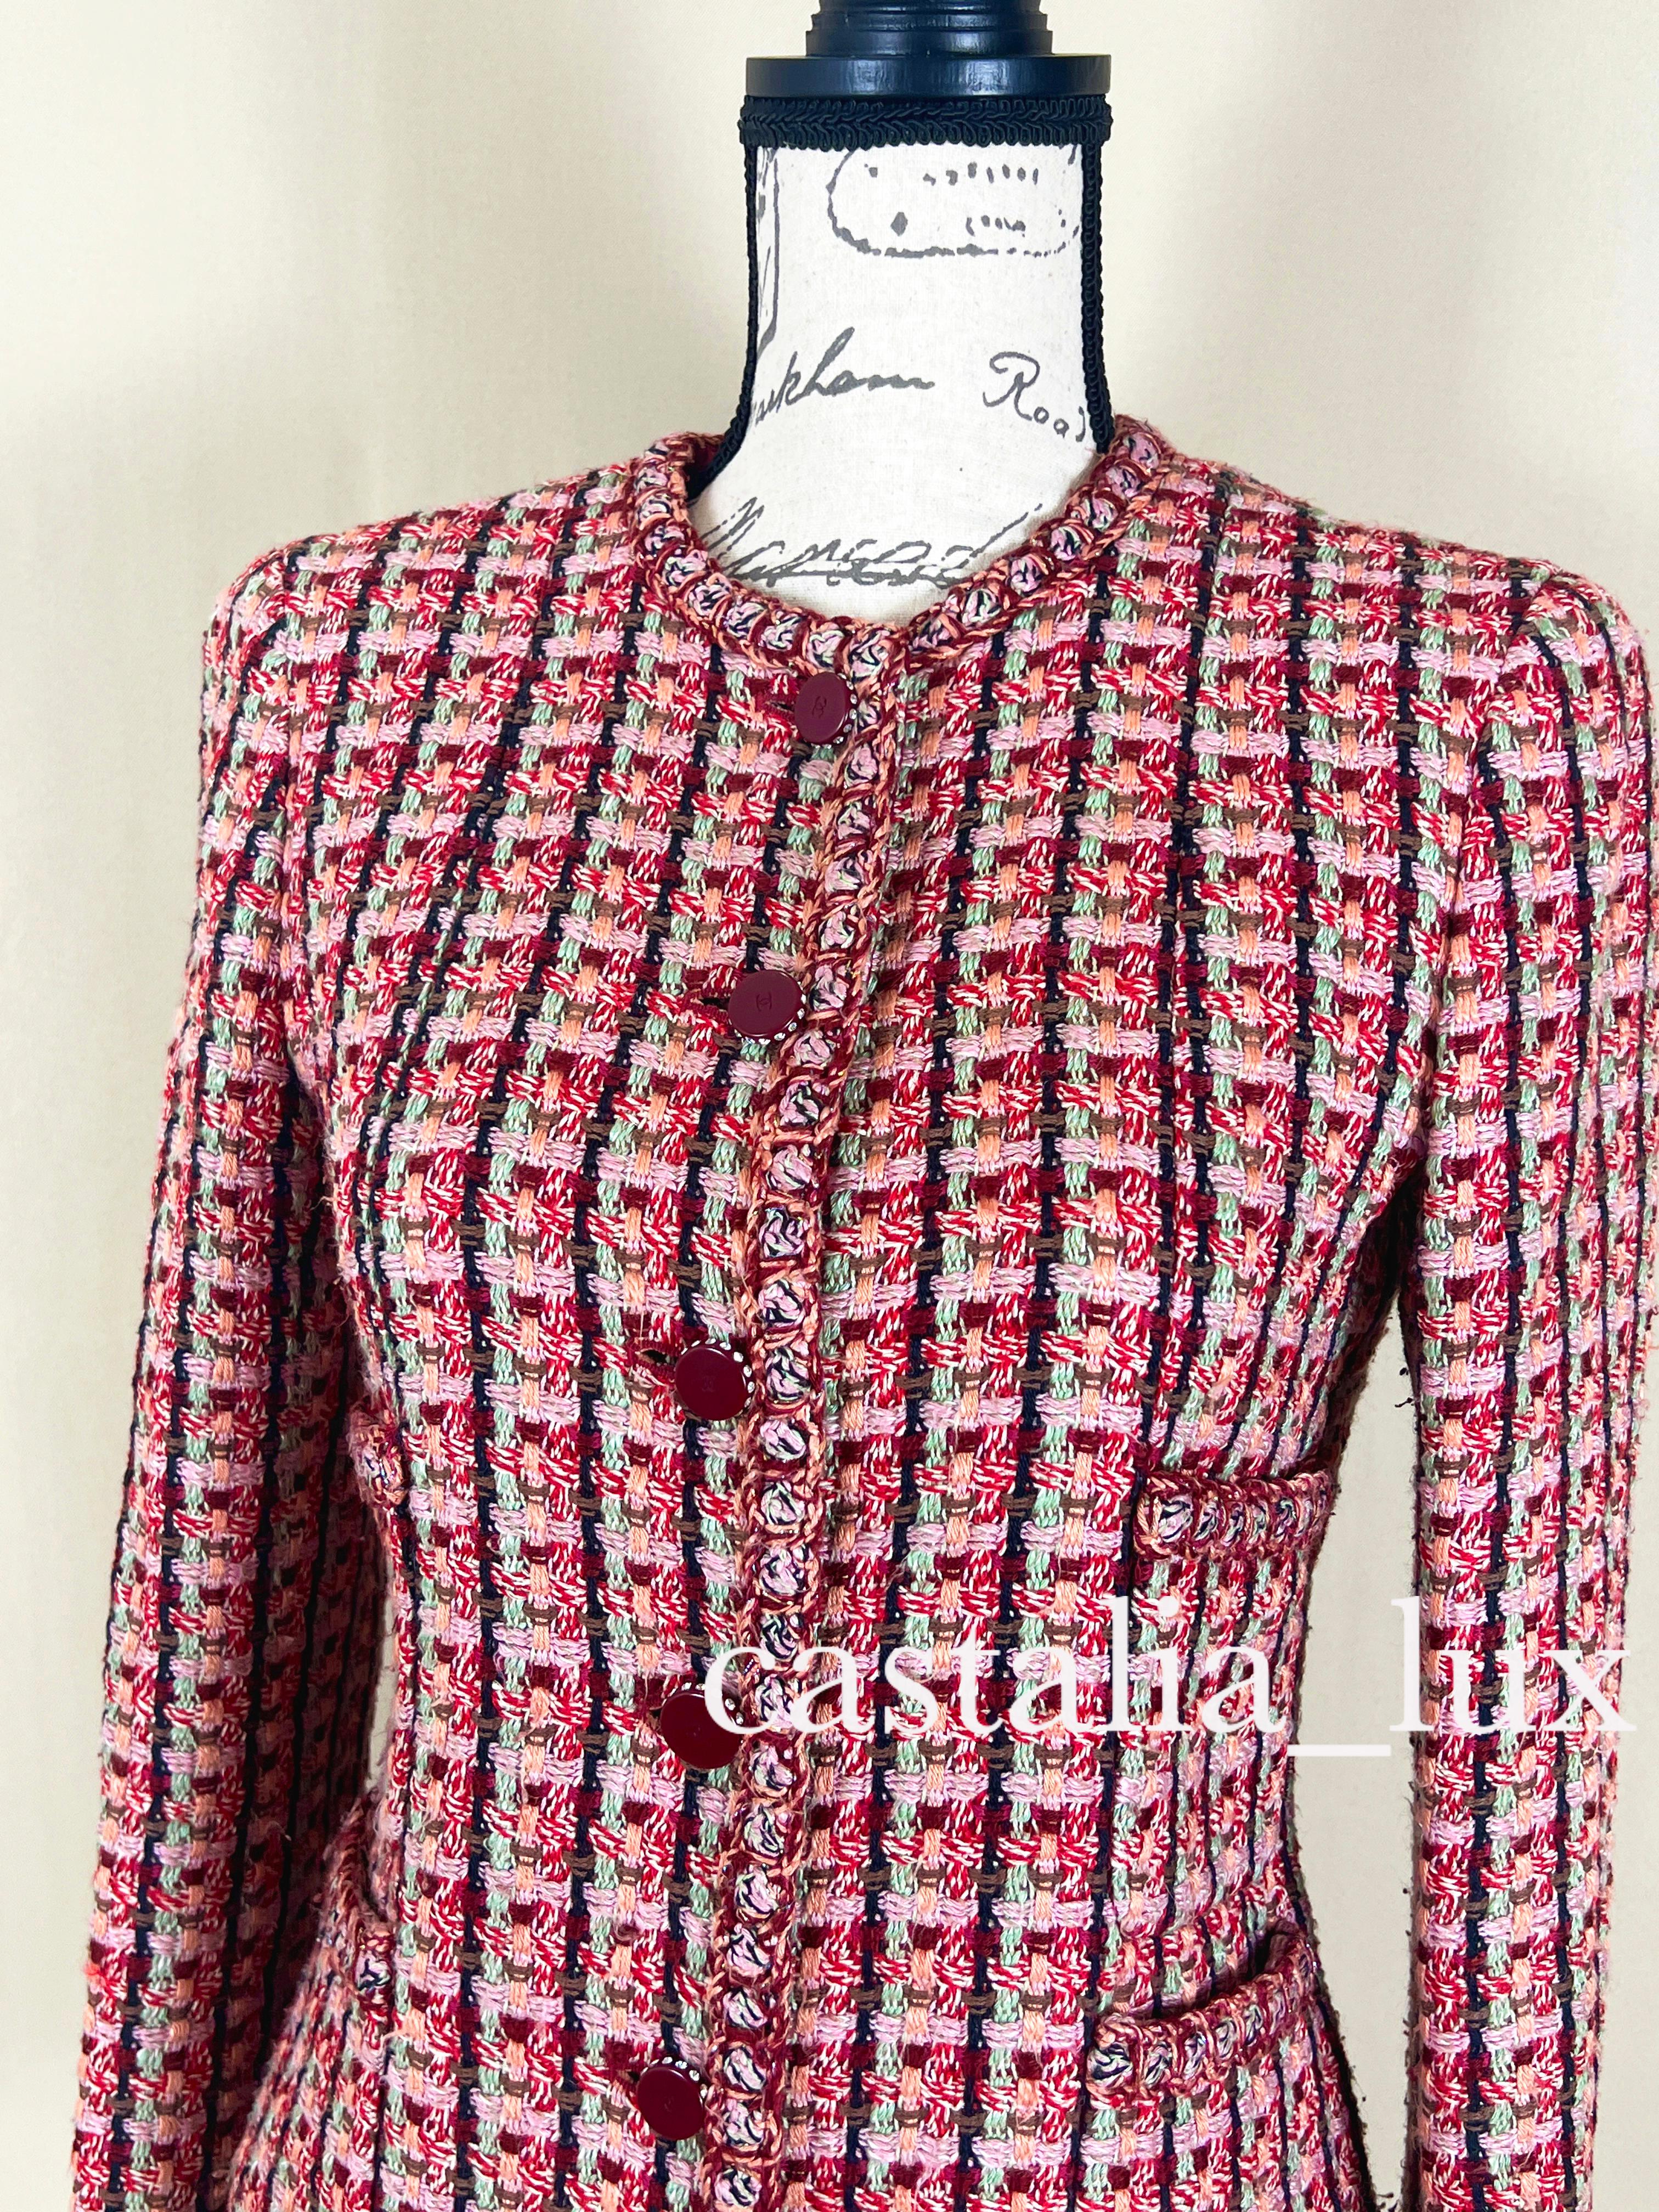 Chanel Collectible 4-Pockets Tweed Jacket In Excellent Condition For Sale In Dubai, AE